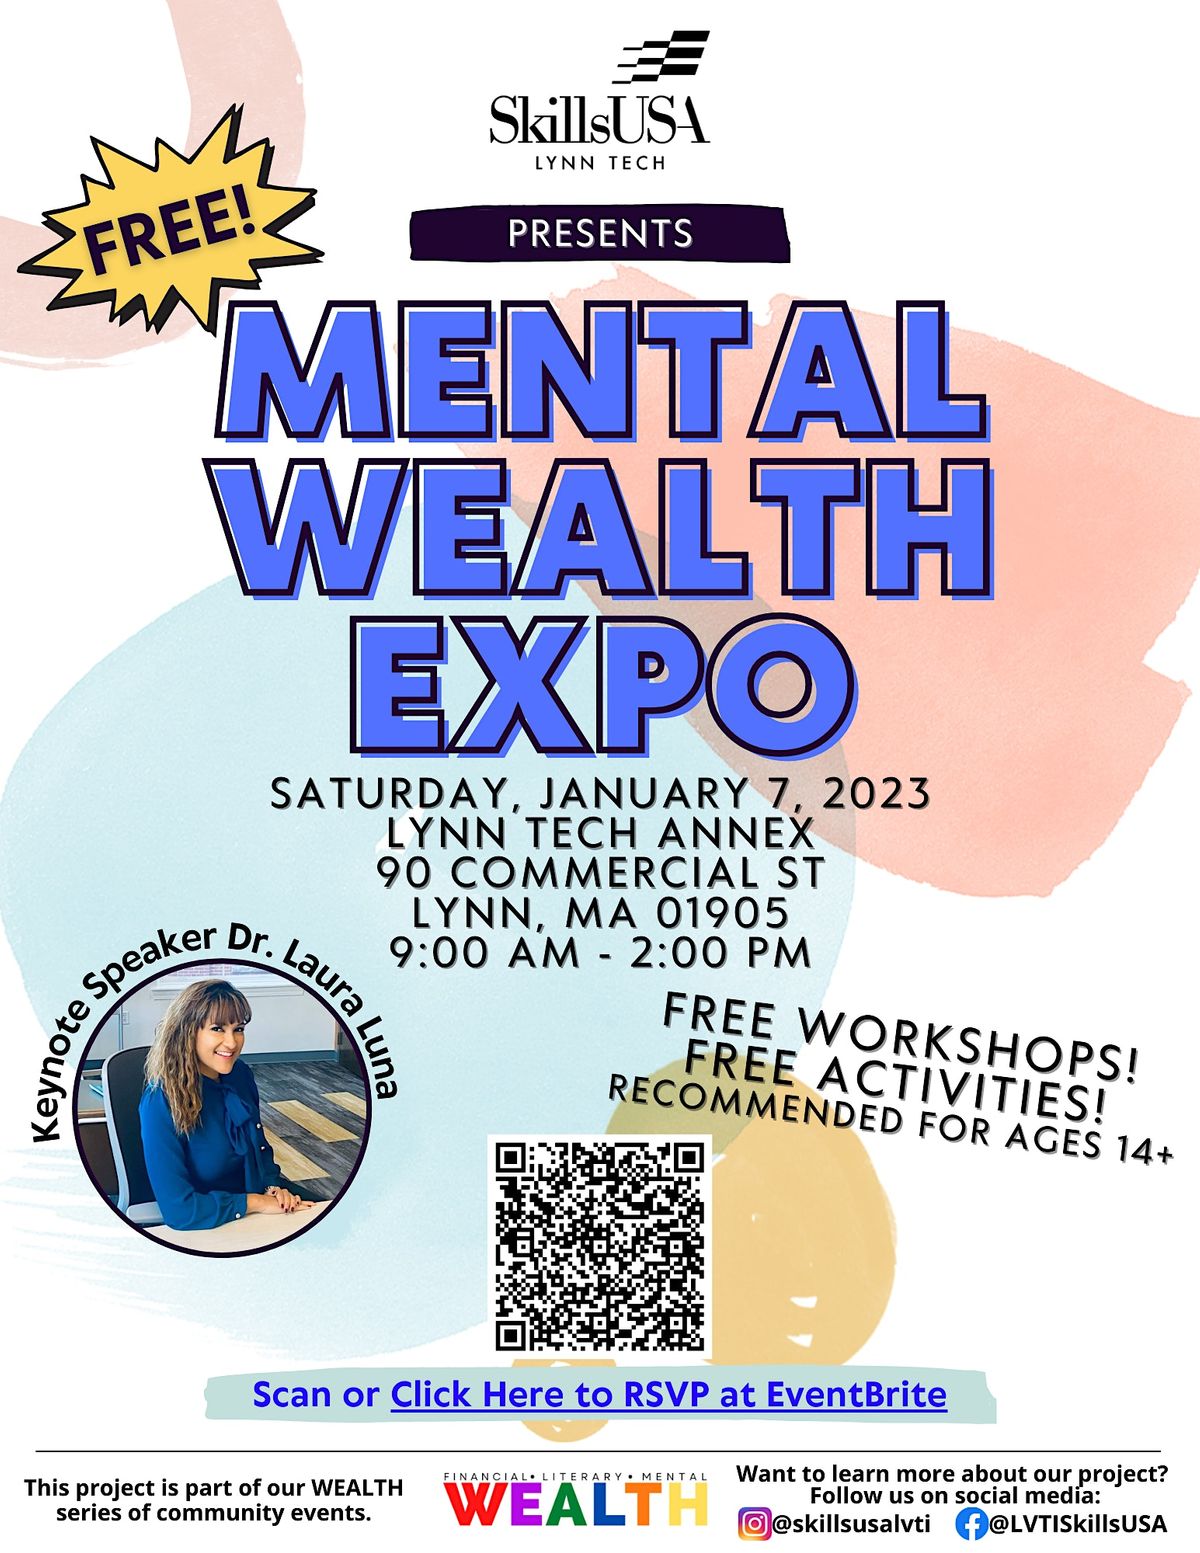 Mental Wealth Expo 90 Commercial St, Lynn, MA January 7, 2023